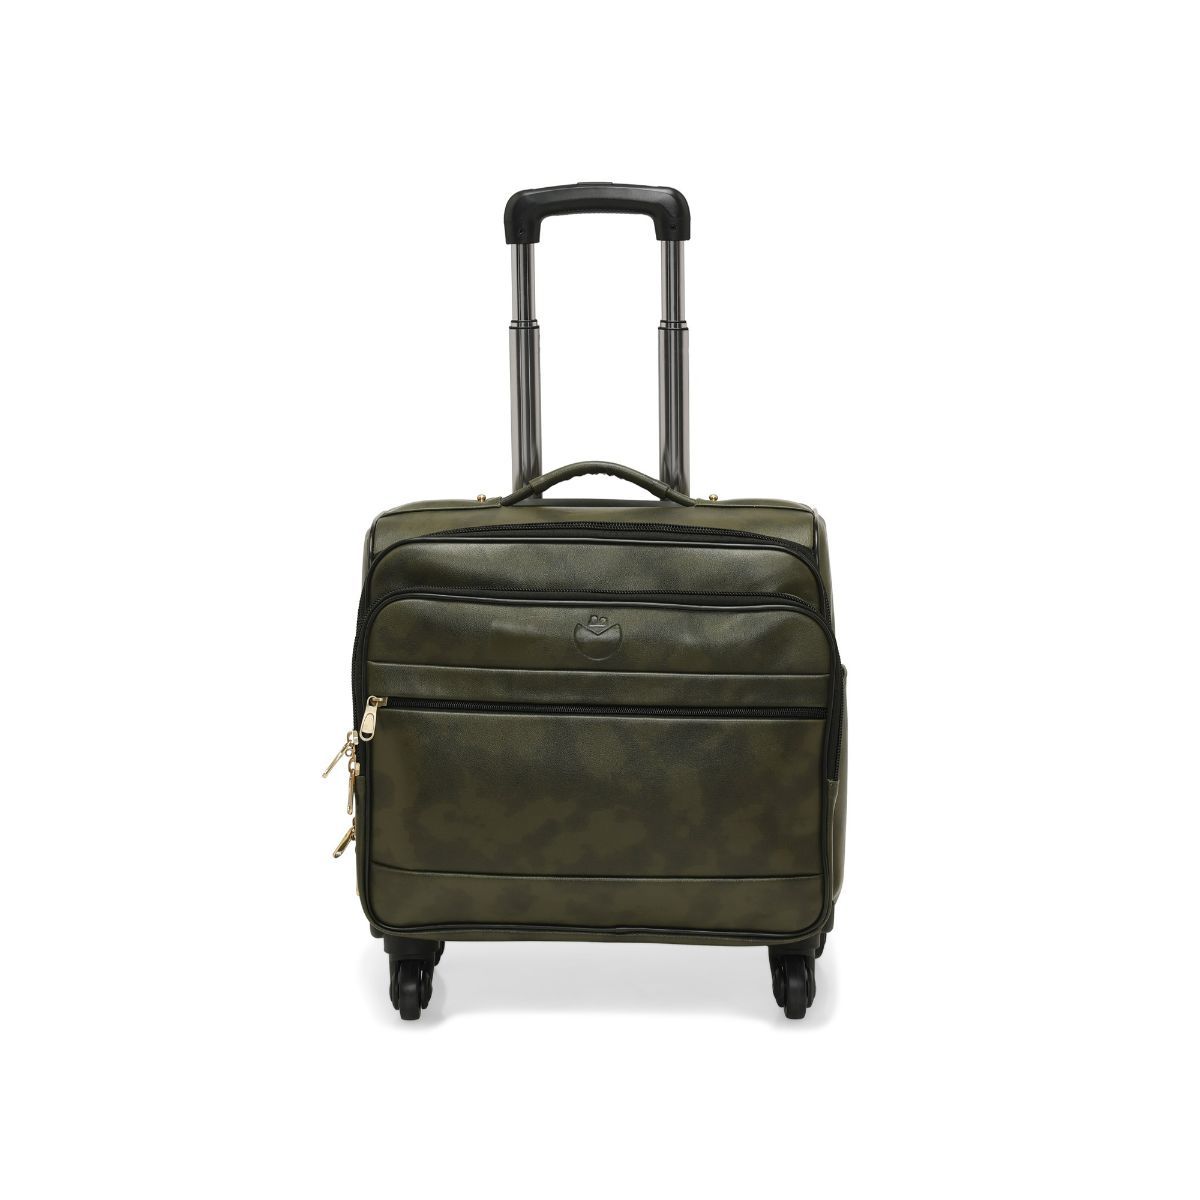 Travel Luggage Sets for Women - Luxury Bags, Trunks | LOUIS VUITTON ®